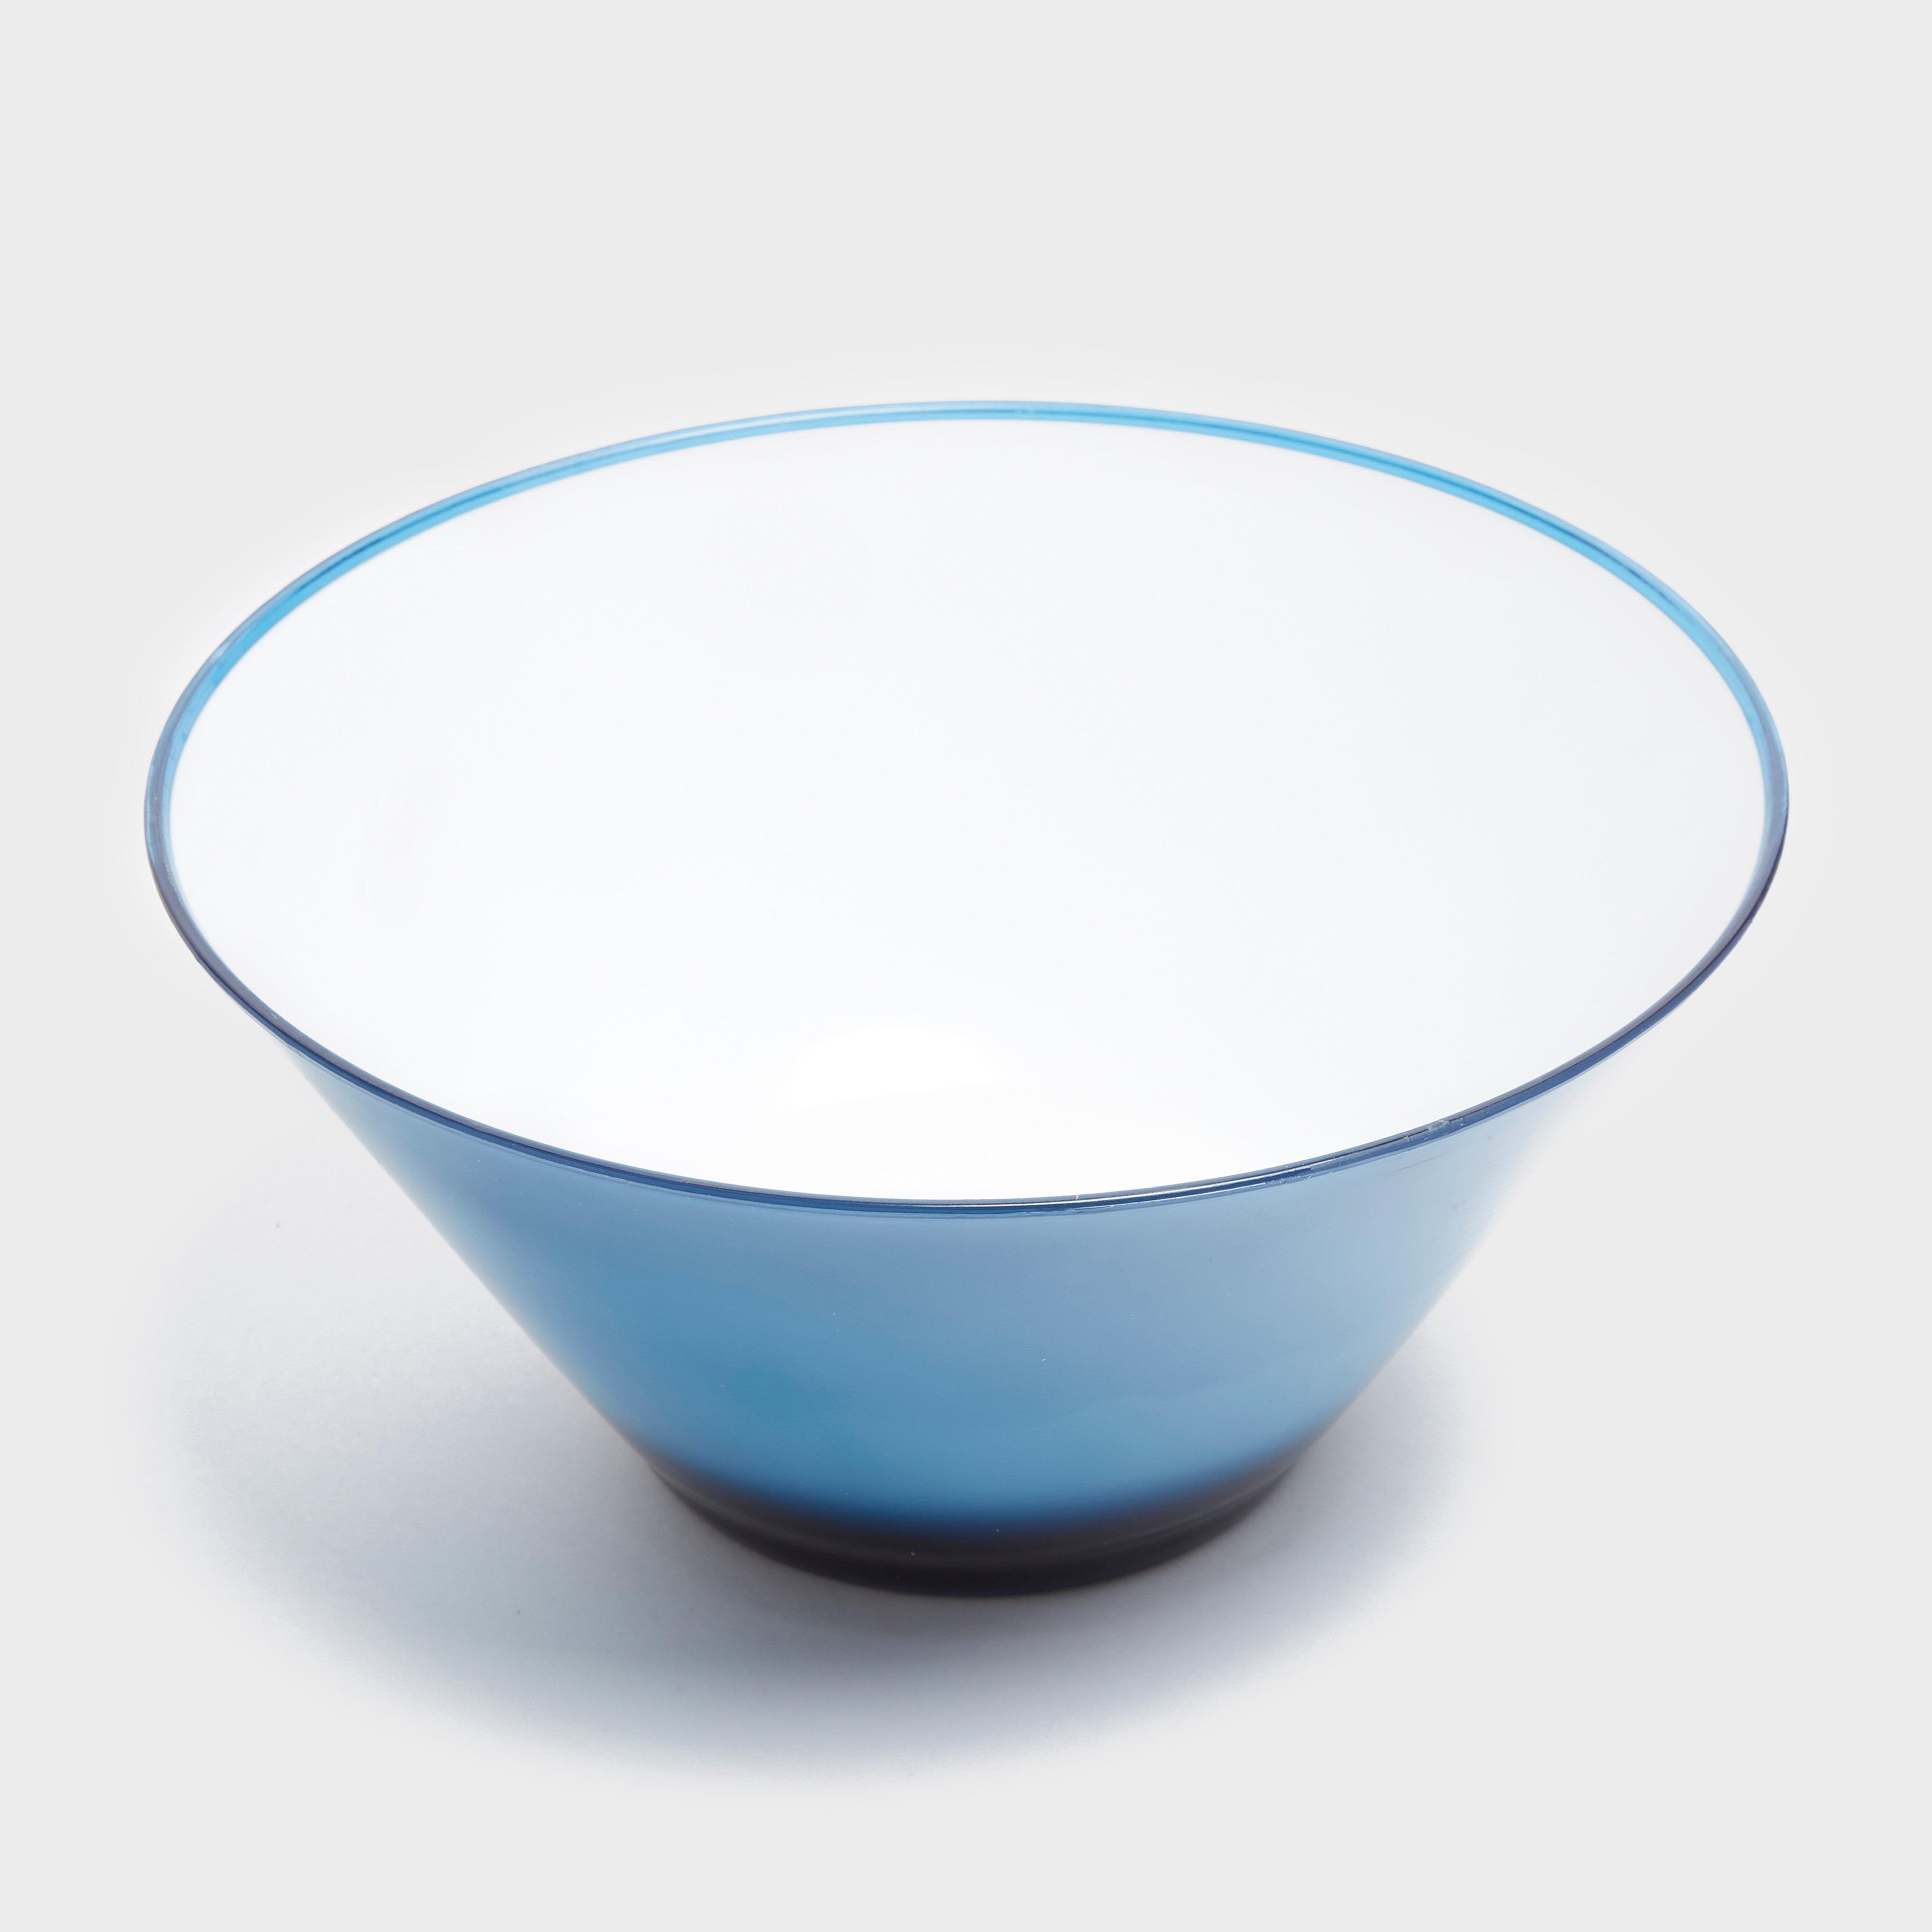 Photos - Other Camping Utensils Hi-Gear Deluxe Salad Bowl, Blue 